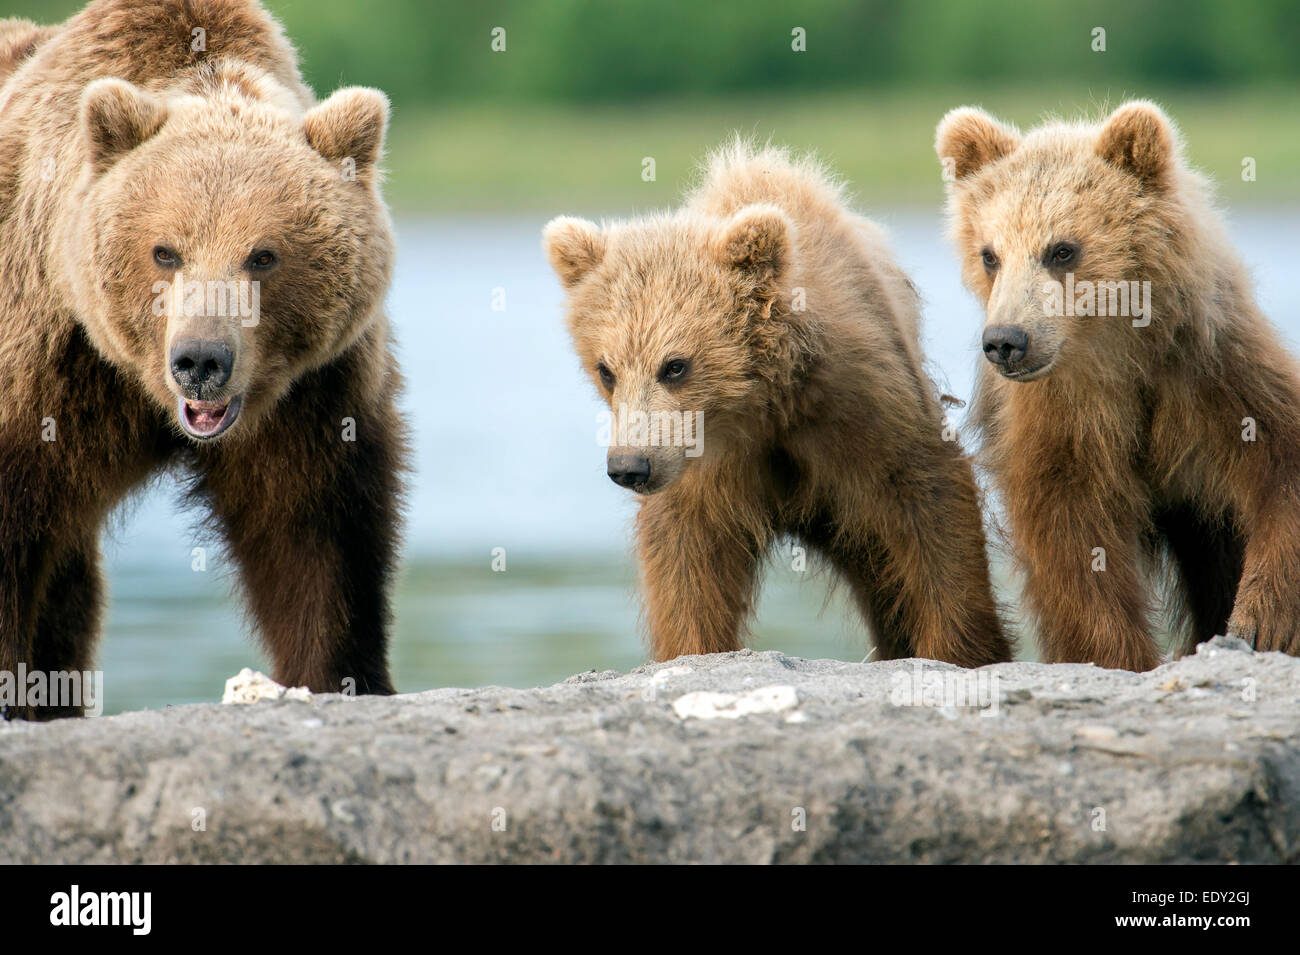 mother bear and two cubs, portrait Stock Photo